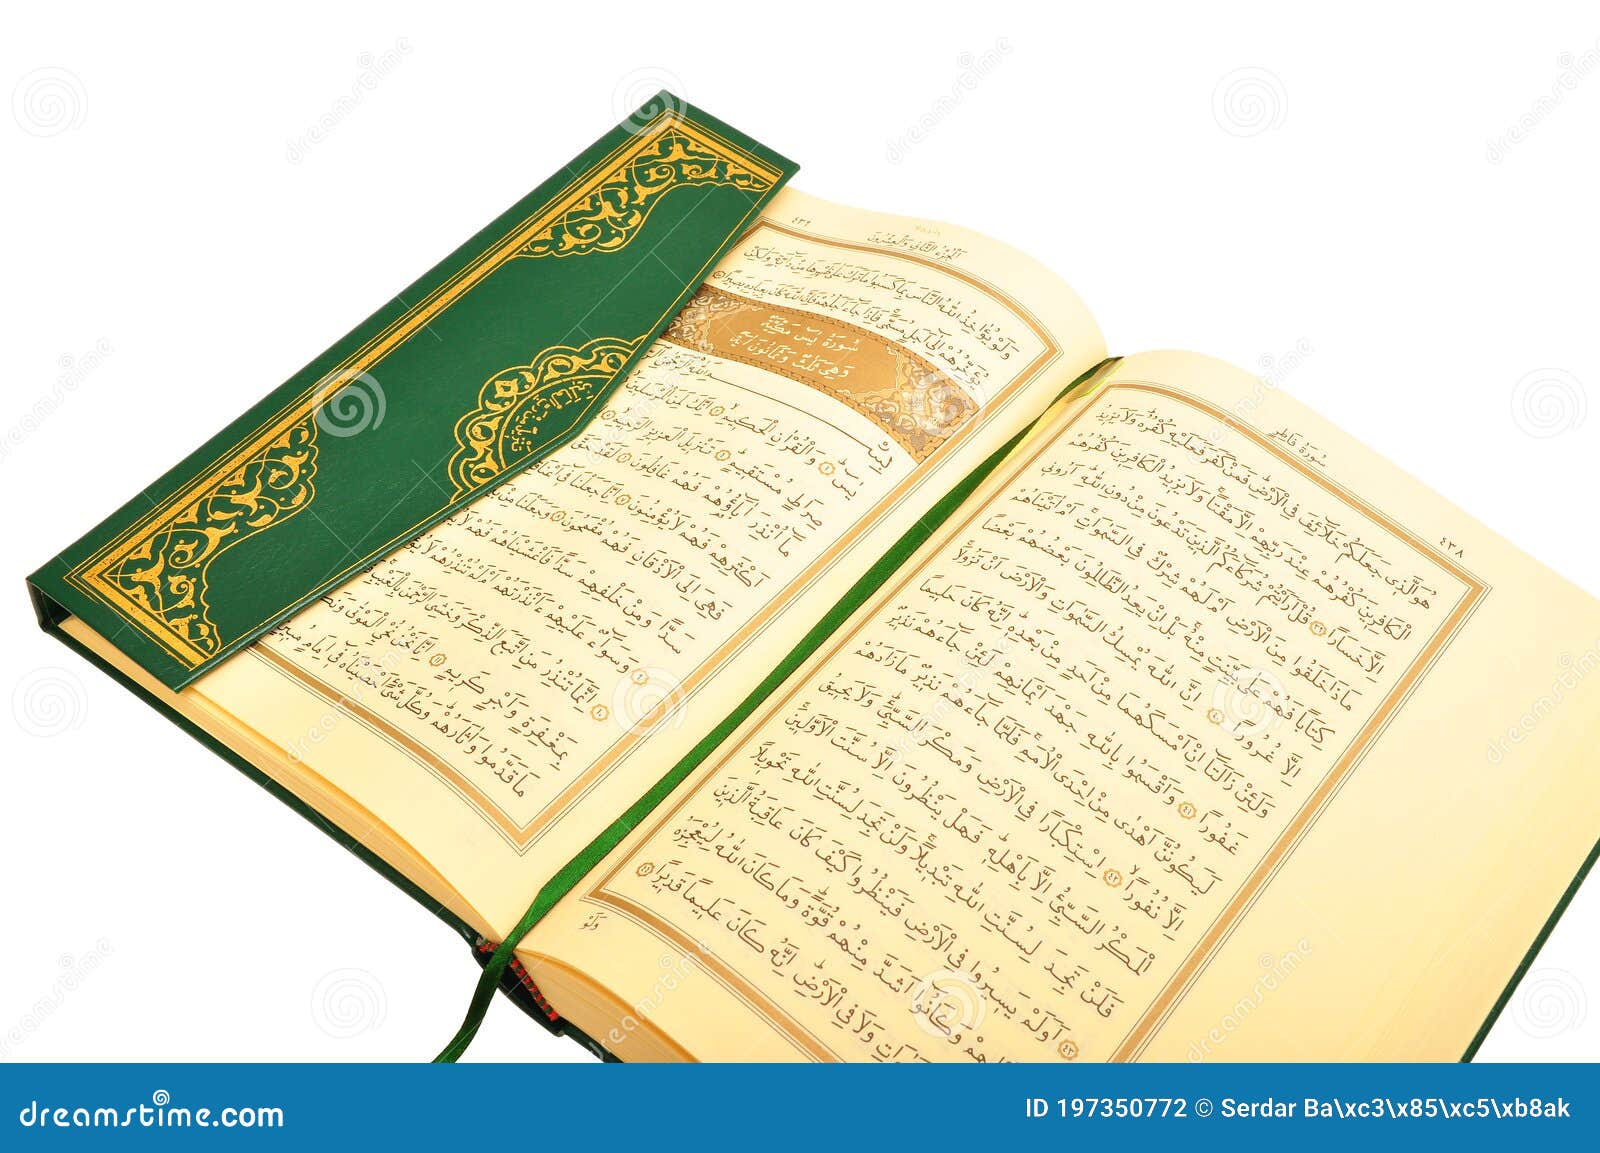 pages verses from the holy book of islam religion quran, kuran and chapters